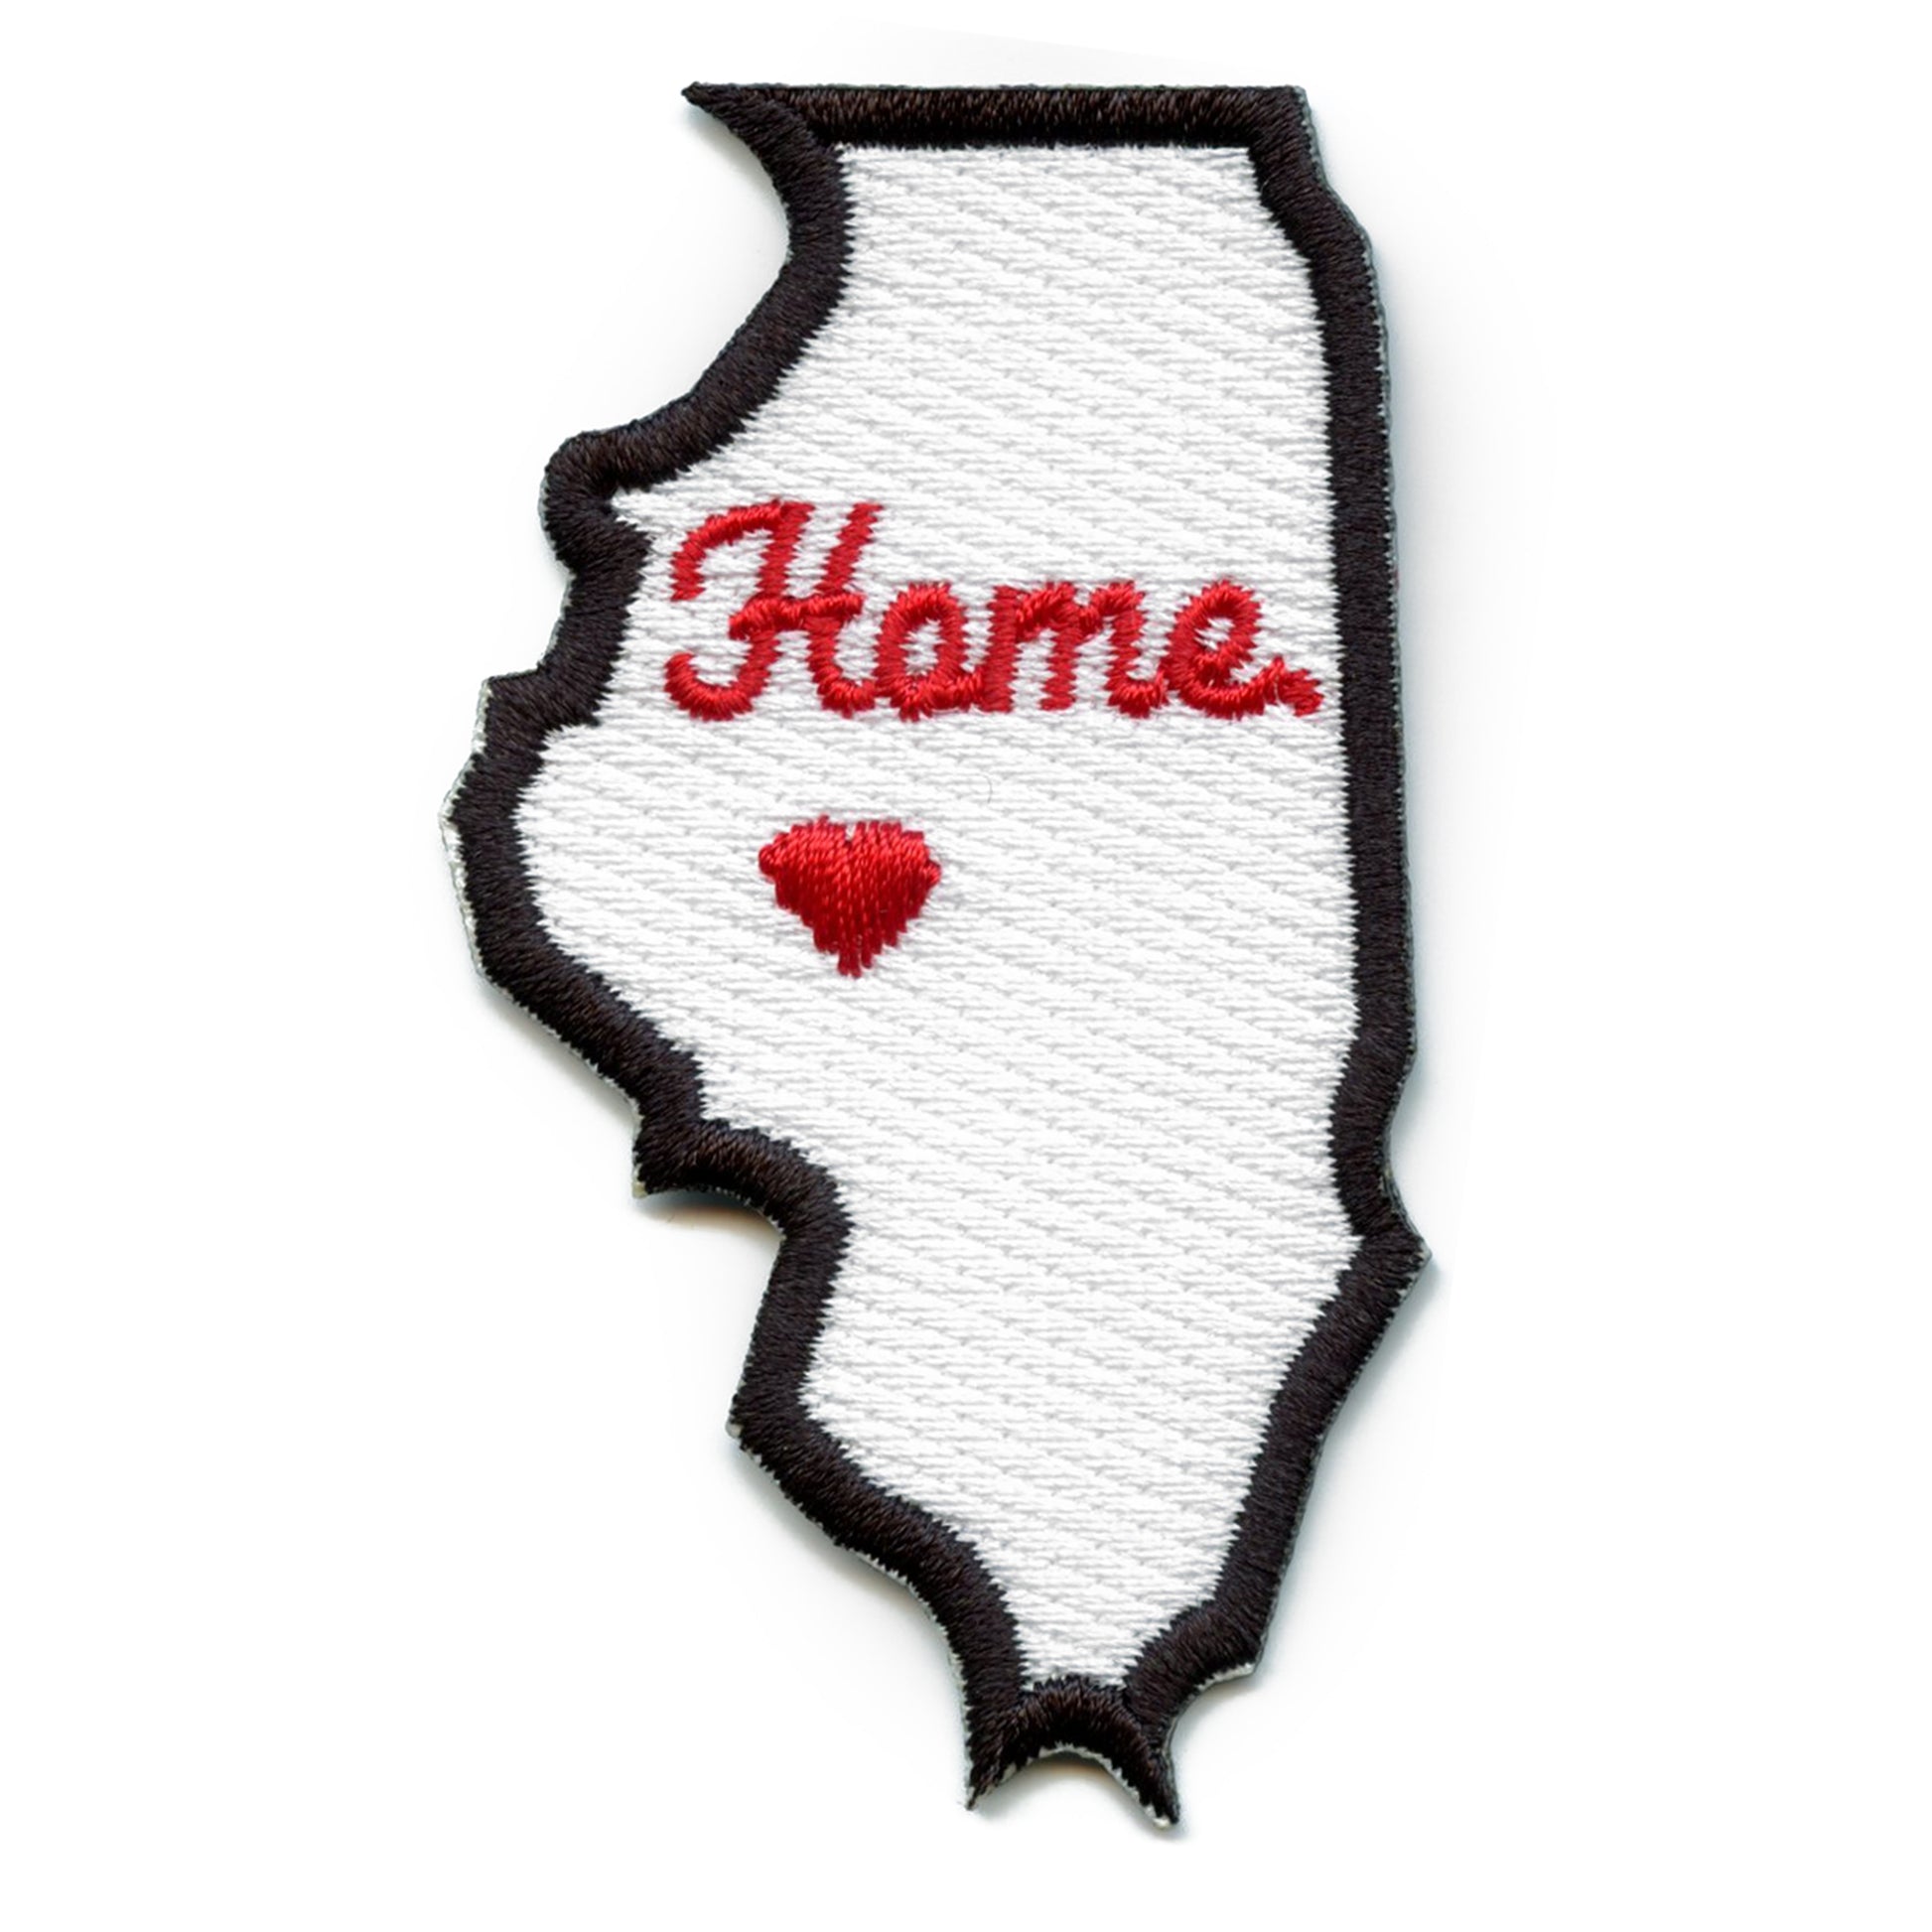 Illinois Home State Patch Basketball Parody Embroidered Iron On - White/Red 